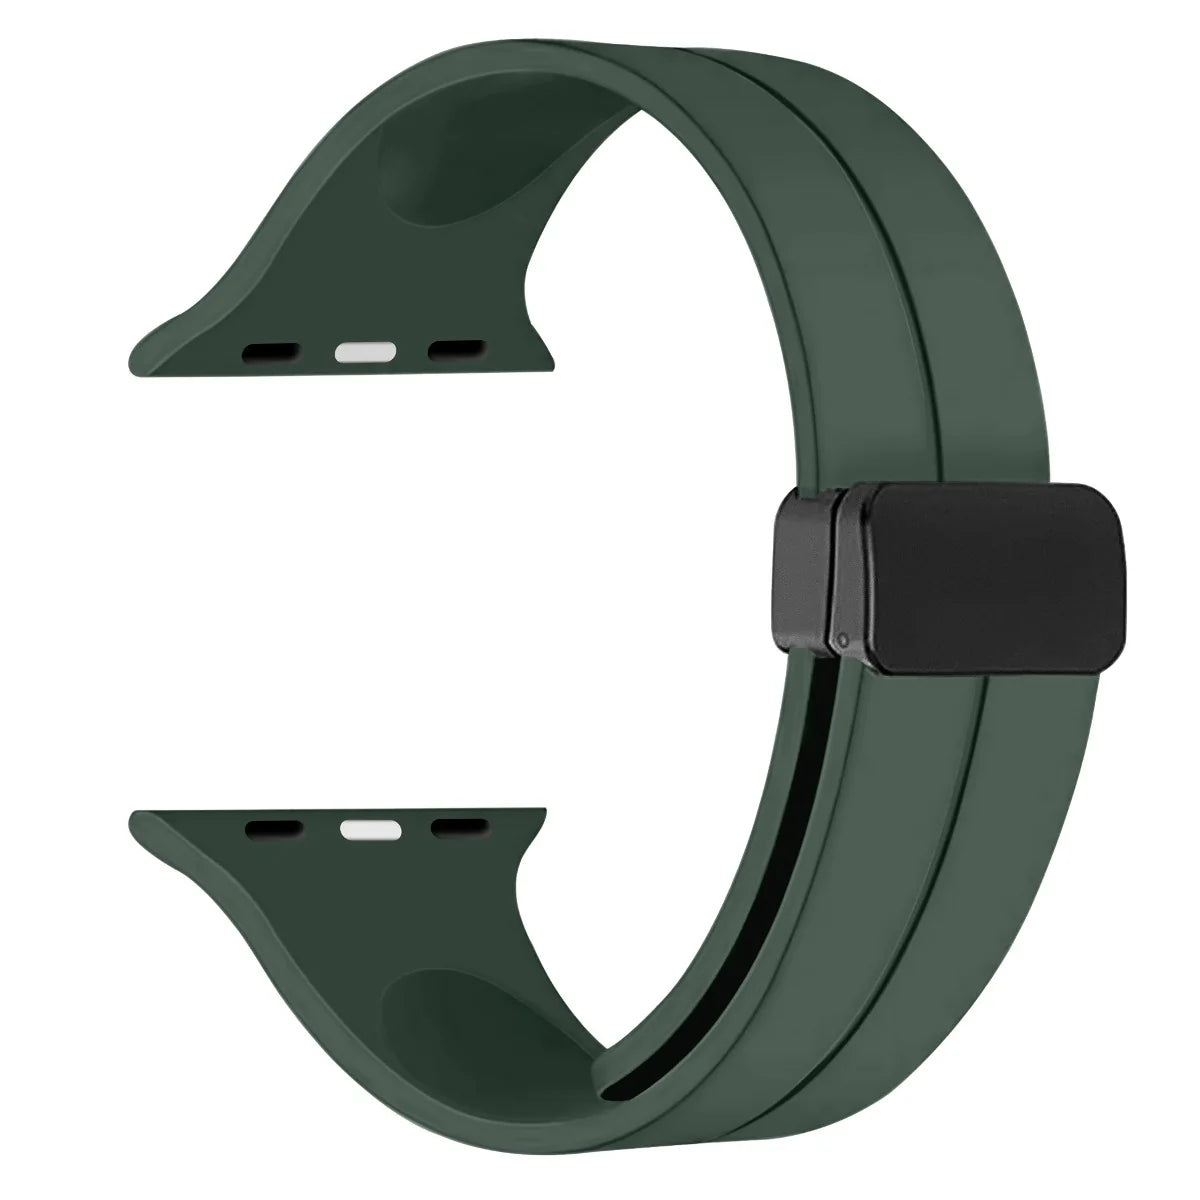 RhinoGuards Magnetic Silicone Band For Apple Watch